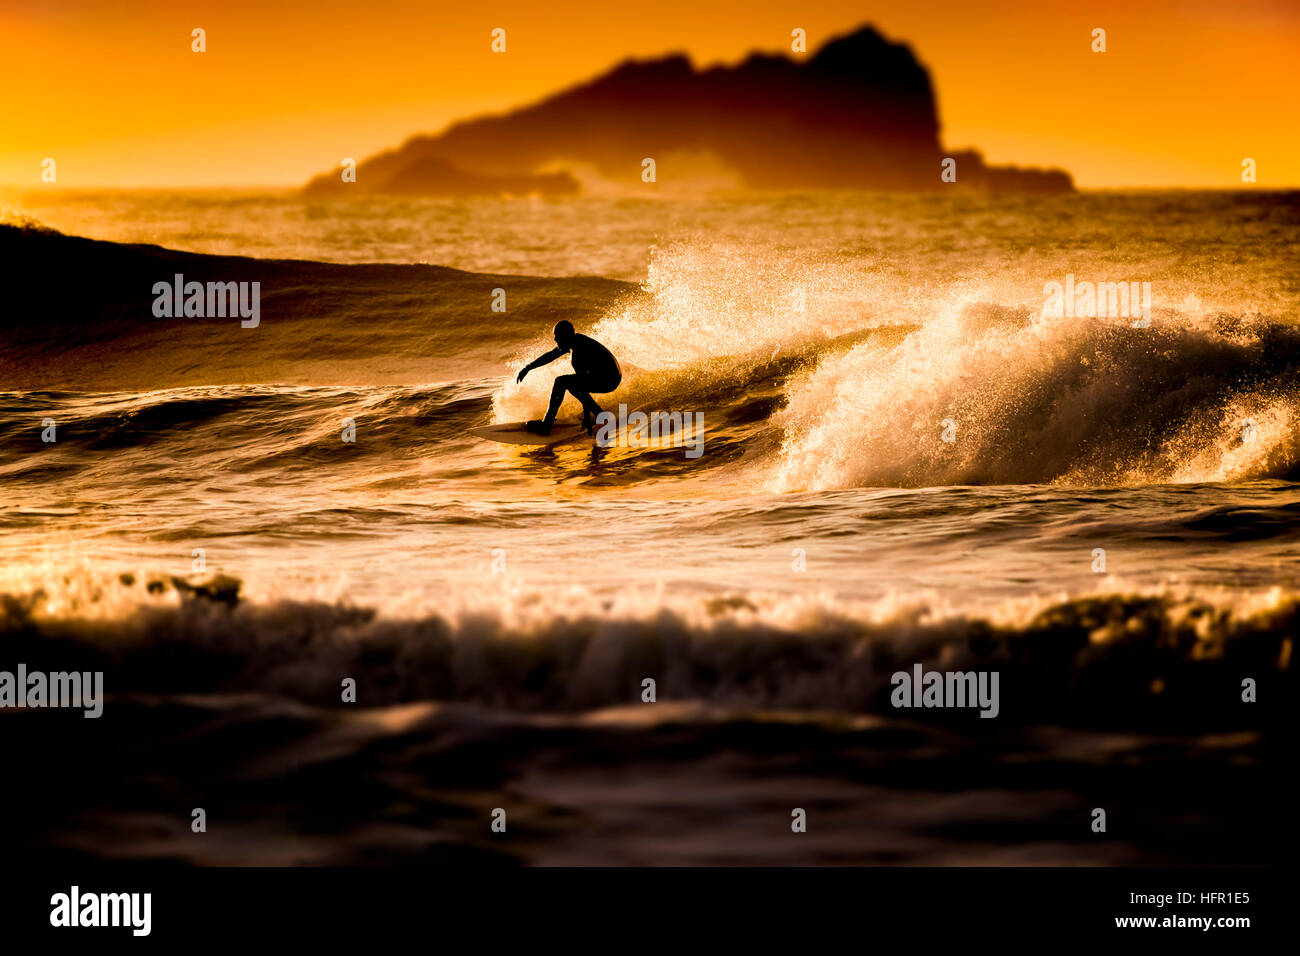 A surfer riding a wave during a golden sunset at Fistral in Newquay, Cornwall.  Surfer in action. UK. Stock Photo